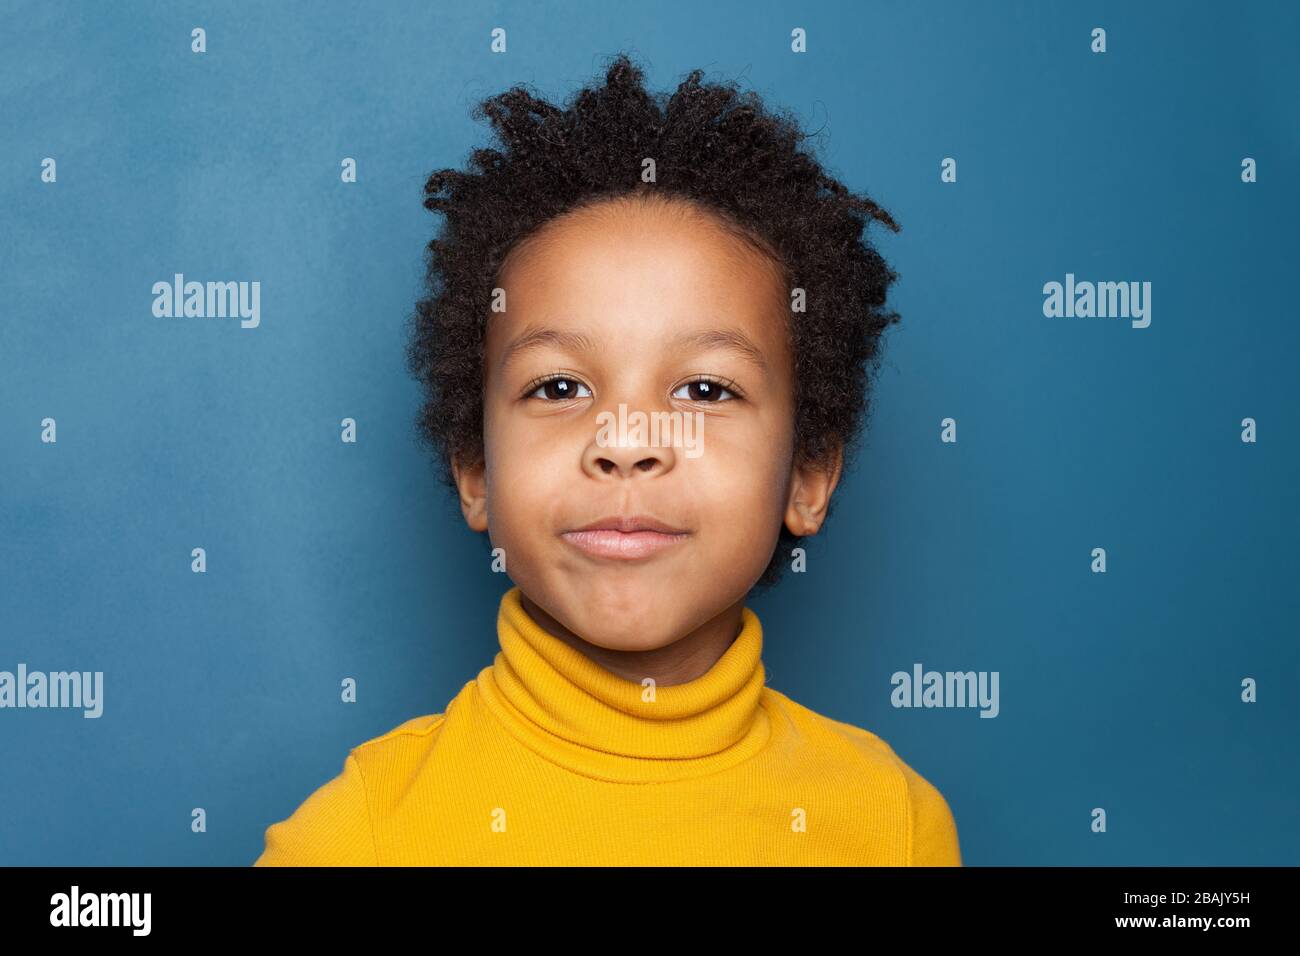 Curious kid portrait. Happy small black child on blue background Stock Photo